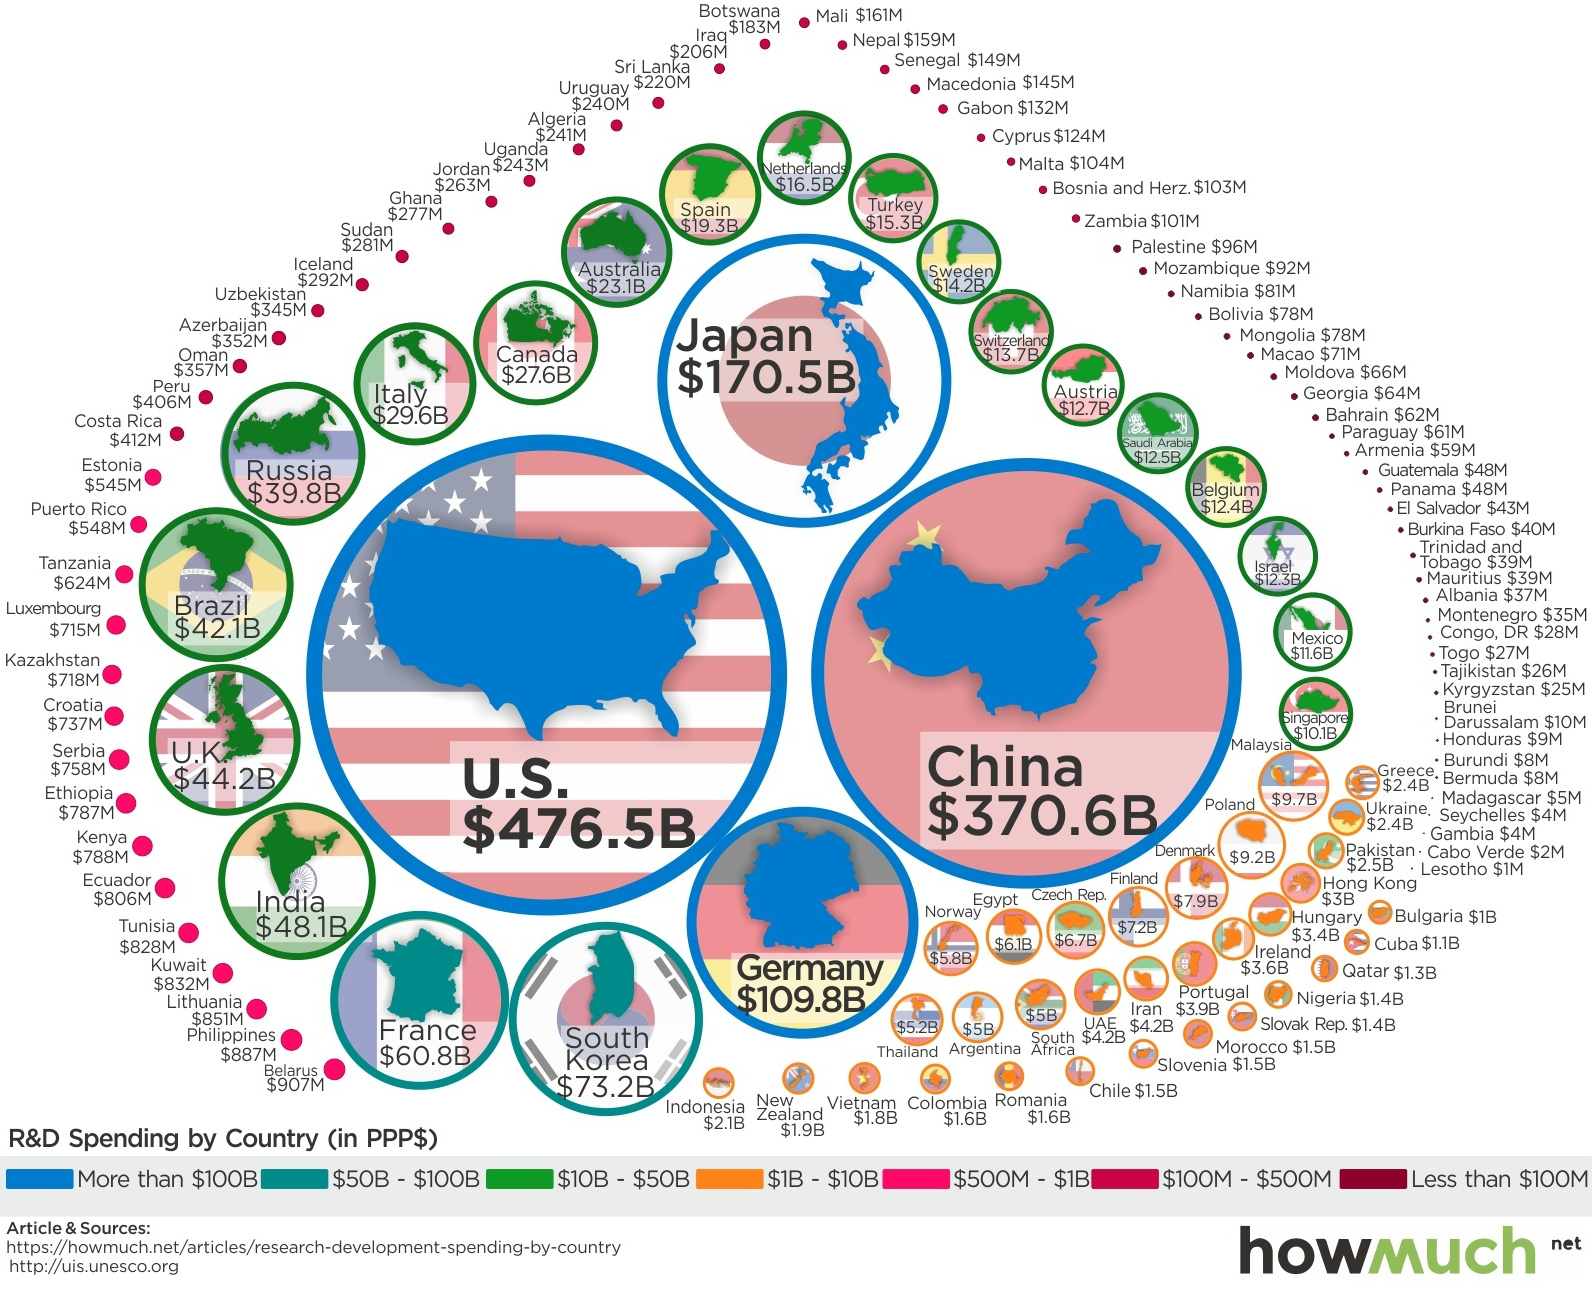 How Much Countries Spend on R&D